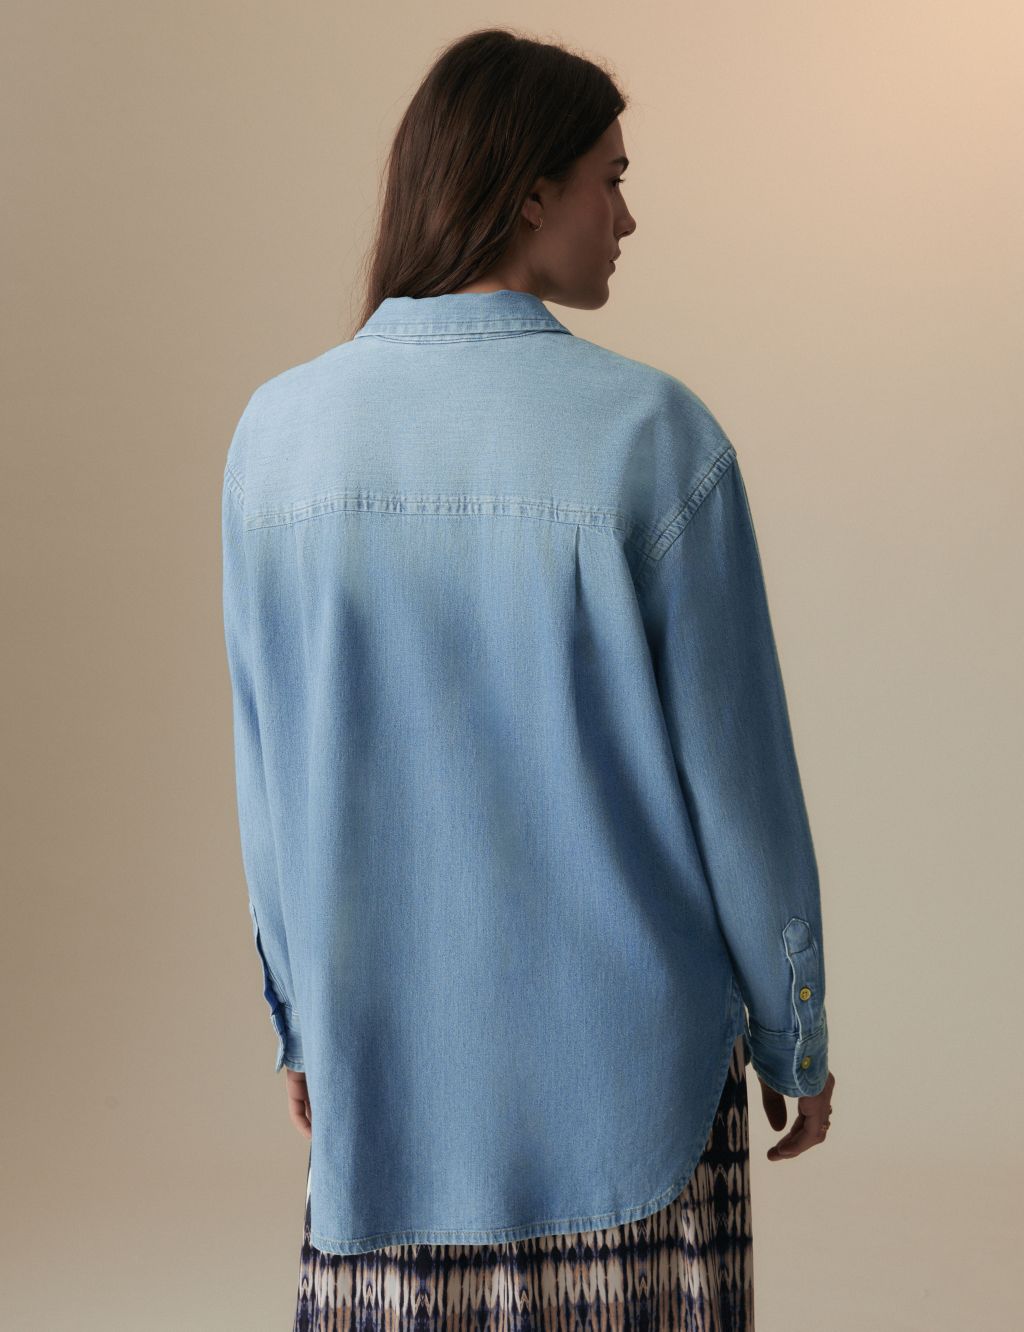 Denim Collared Relaxed Shirt image 5